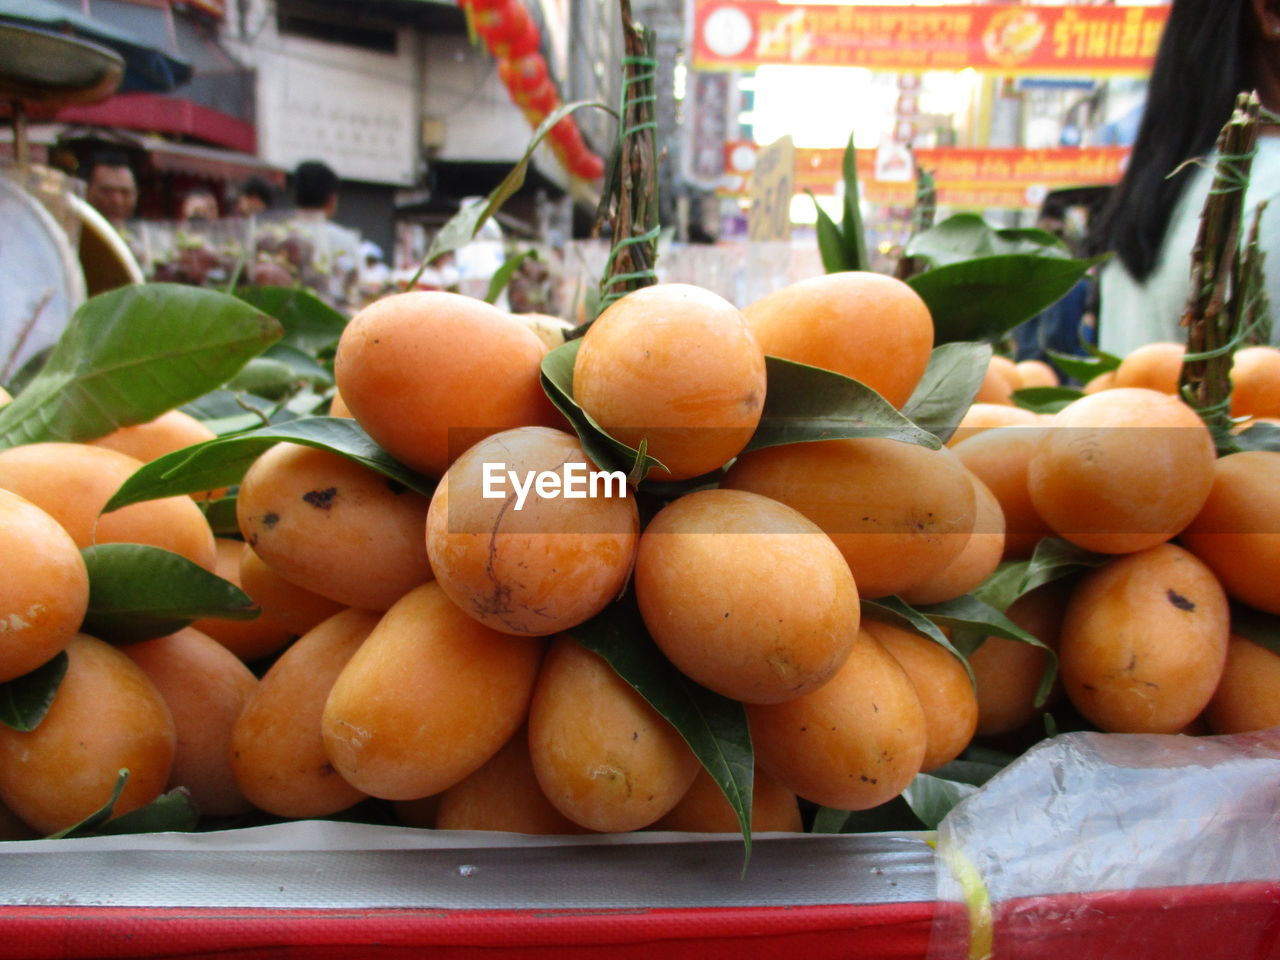 CLOSE-UP OF FRUITS FOR SALE AT MARKET